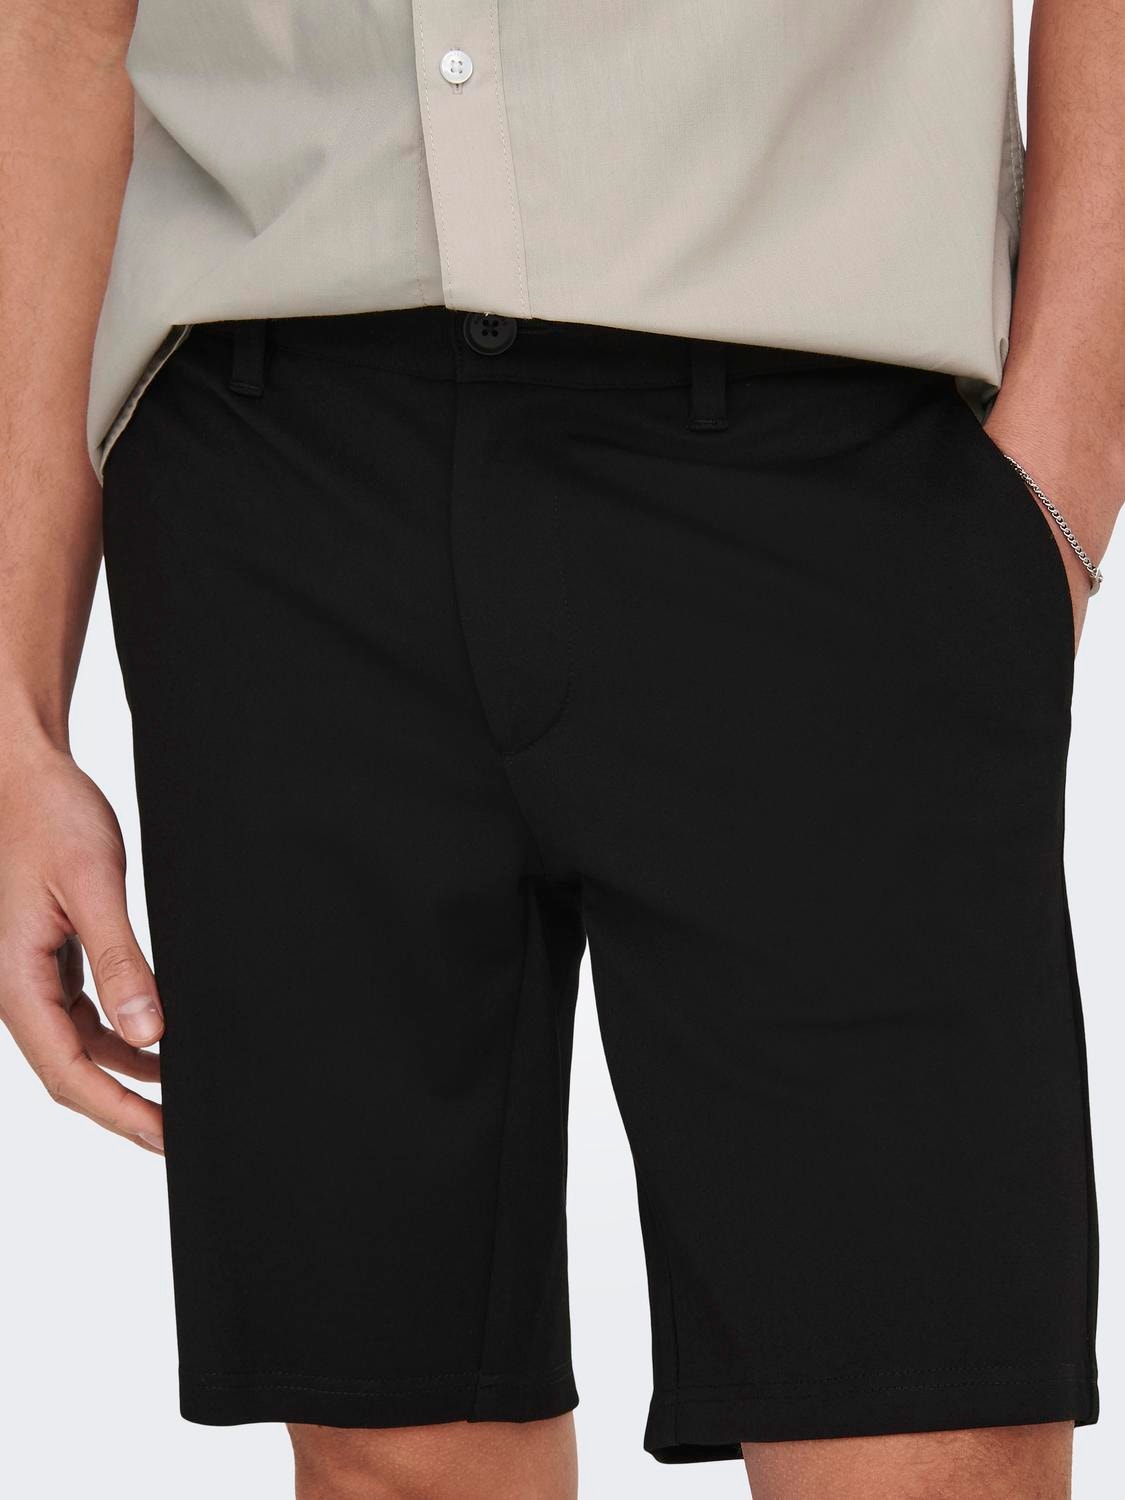 ONLY & SONS Regular fit Mid waist Shorts -Black - 22018667